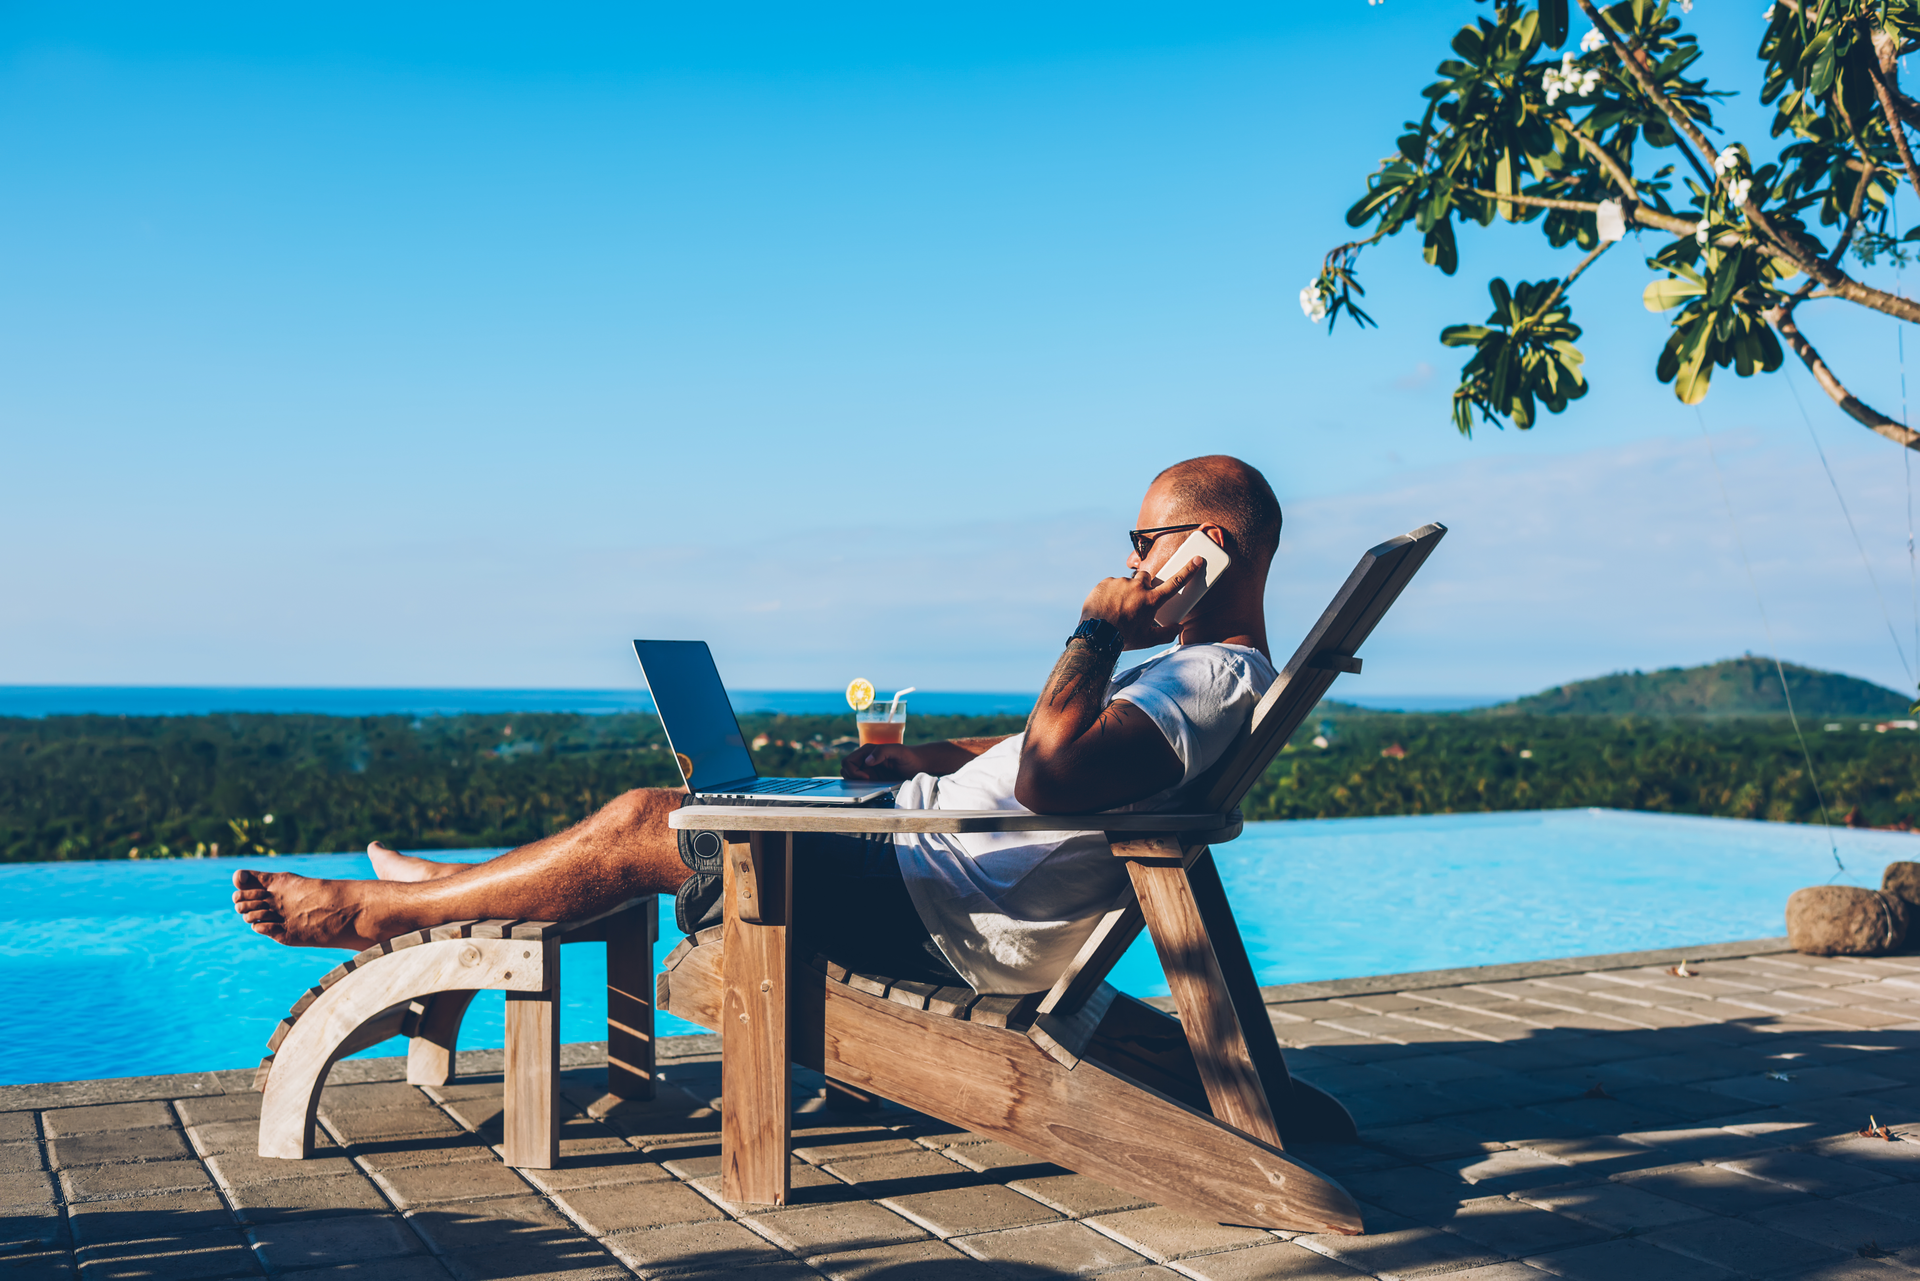 Can Small Business Owners Take Vacations? - business.com